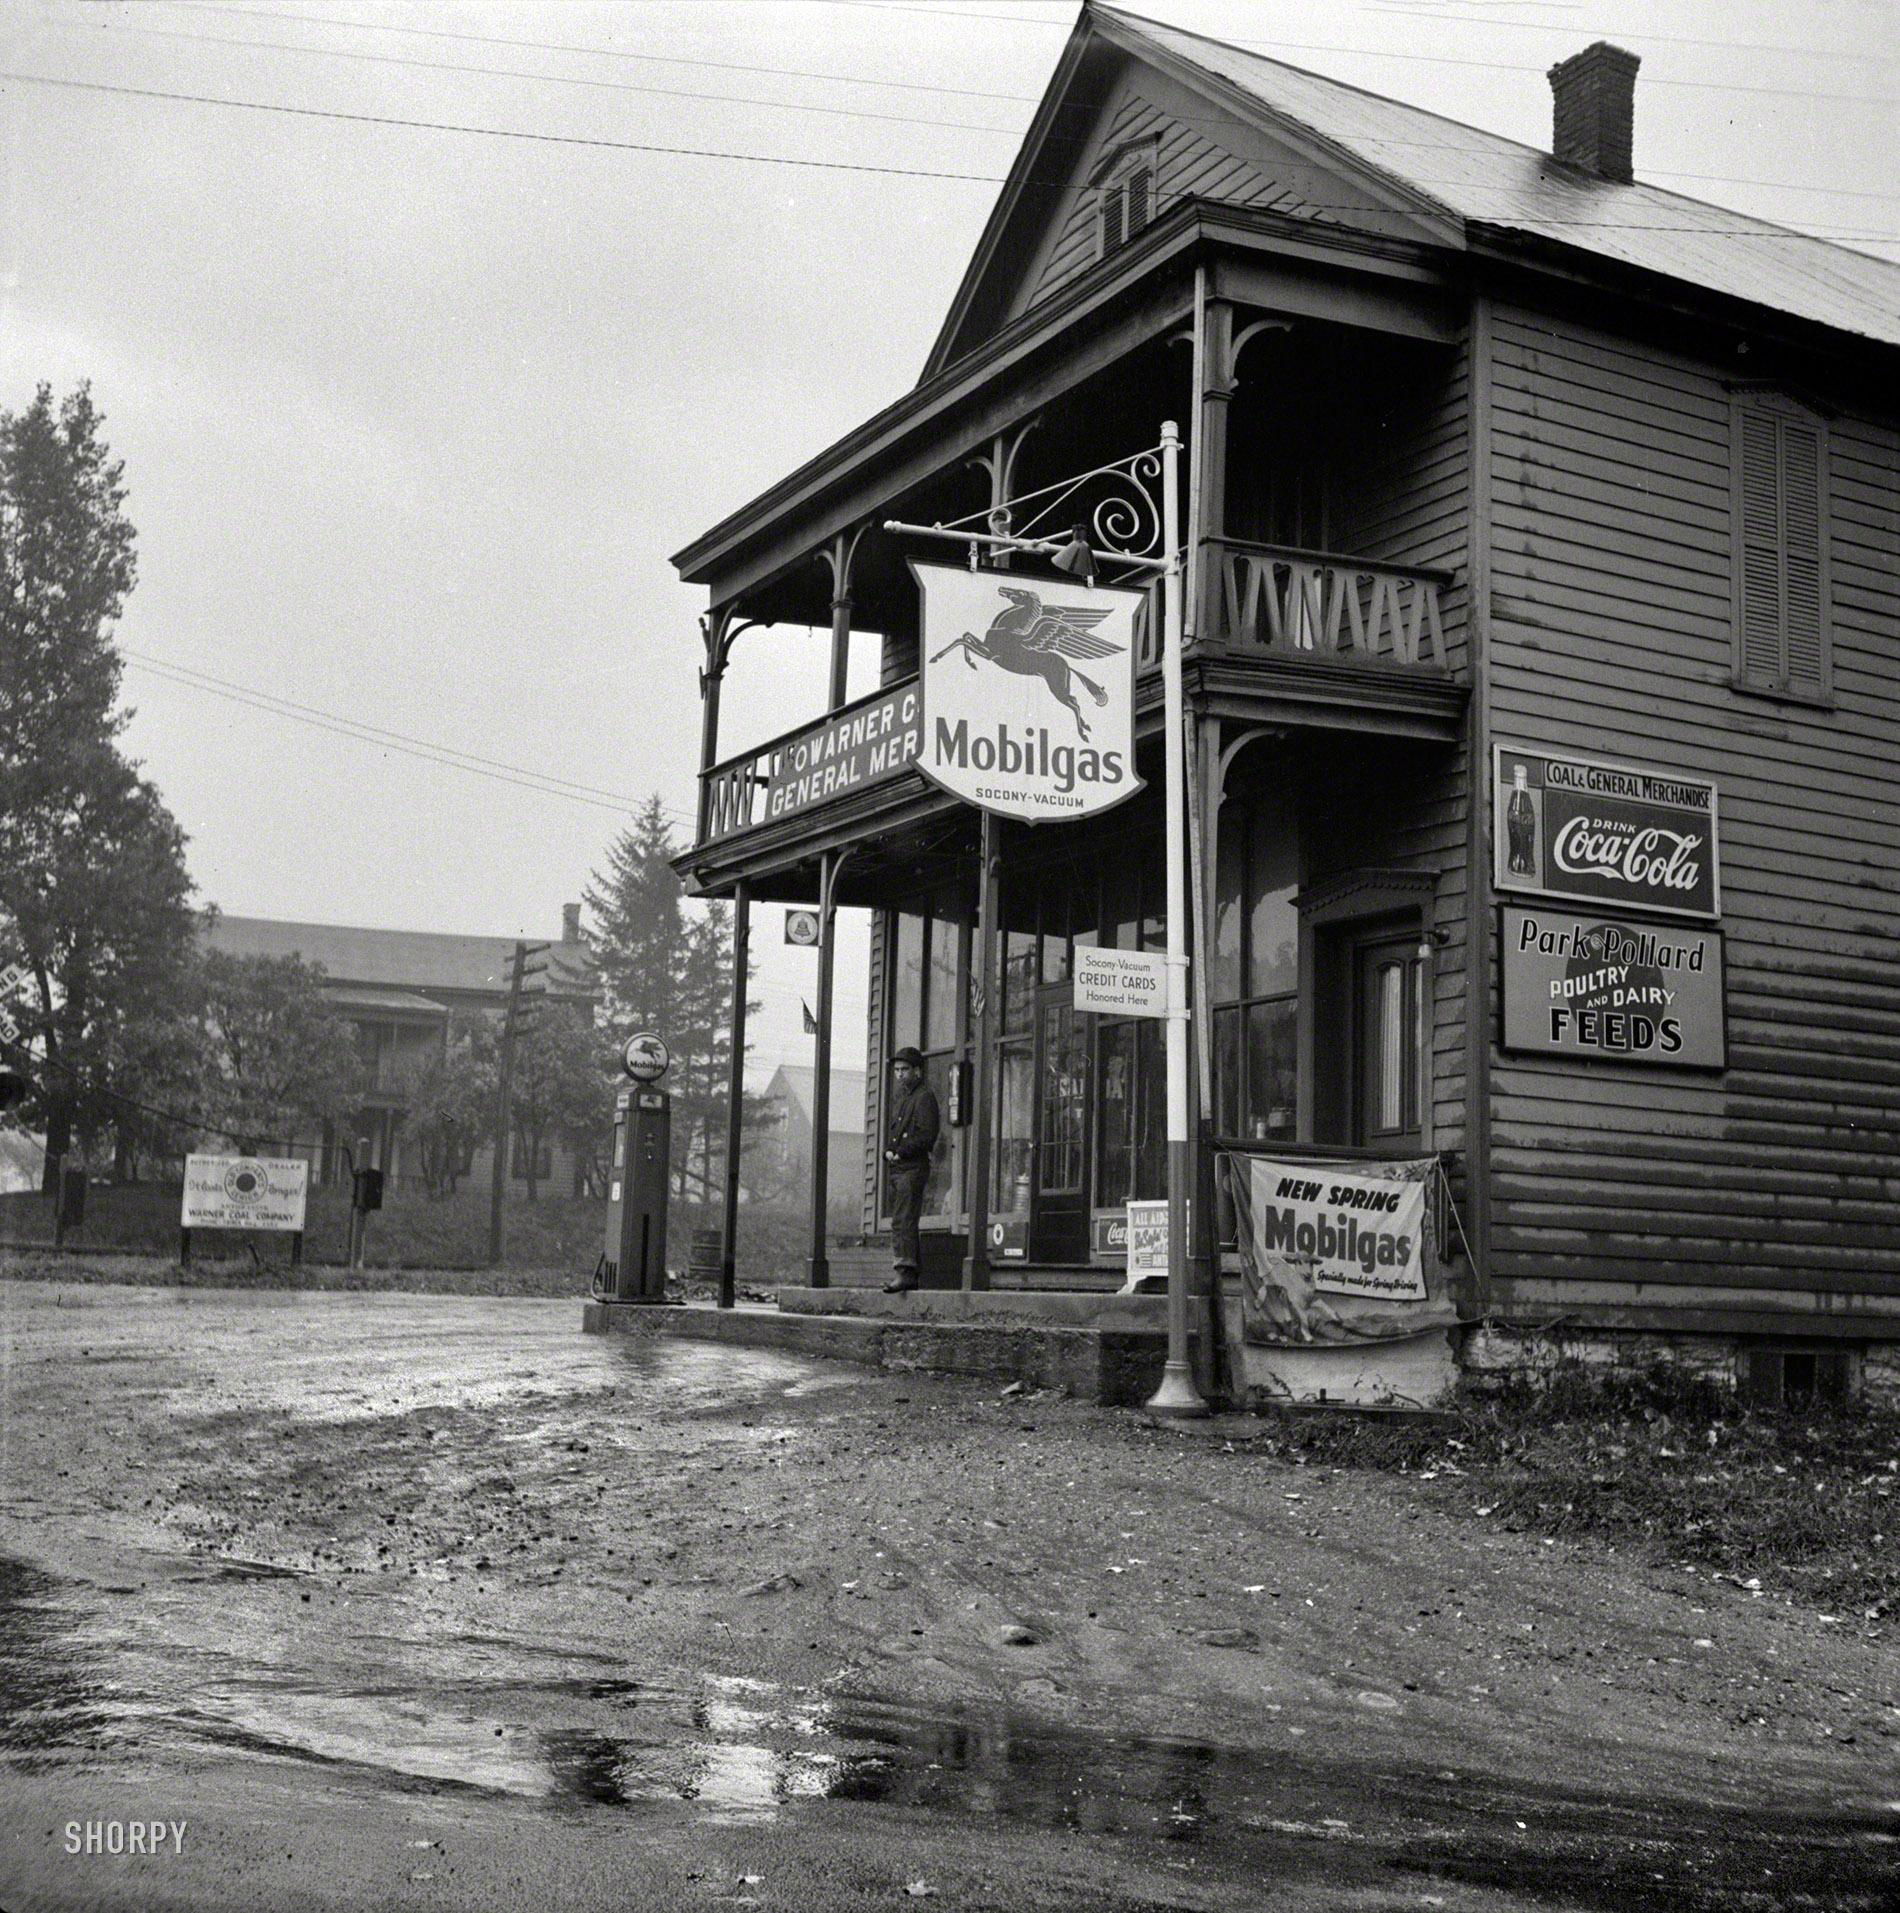 October 1941. "Main store. Fort Hunter, New York." Still on tap: some of that "New Spring" Mobilgas. Photo by John Collier. View full size.